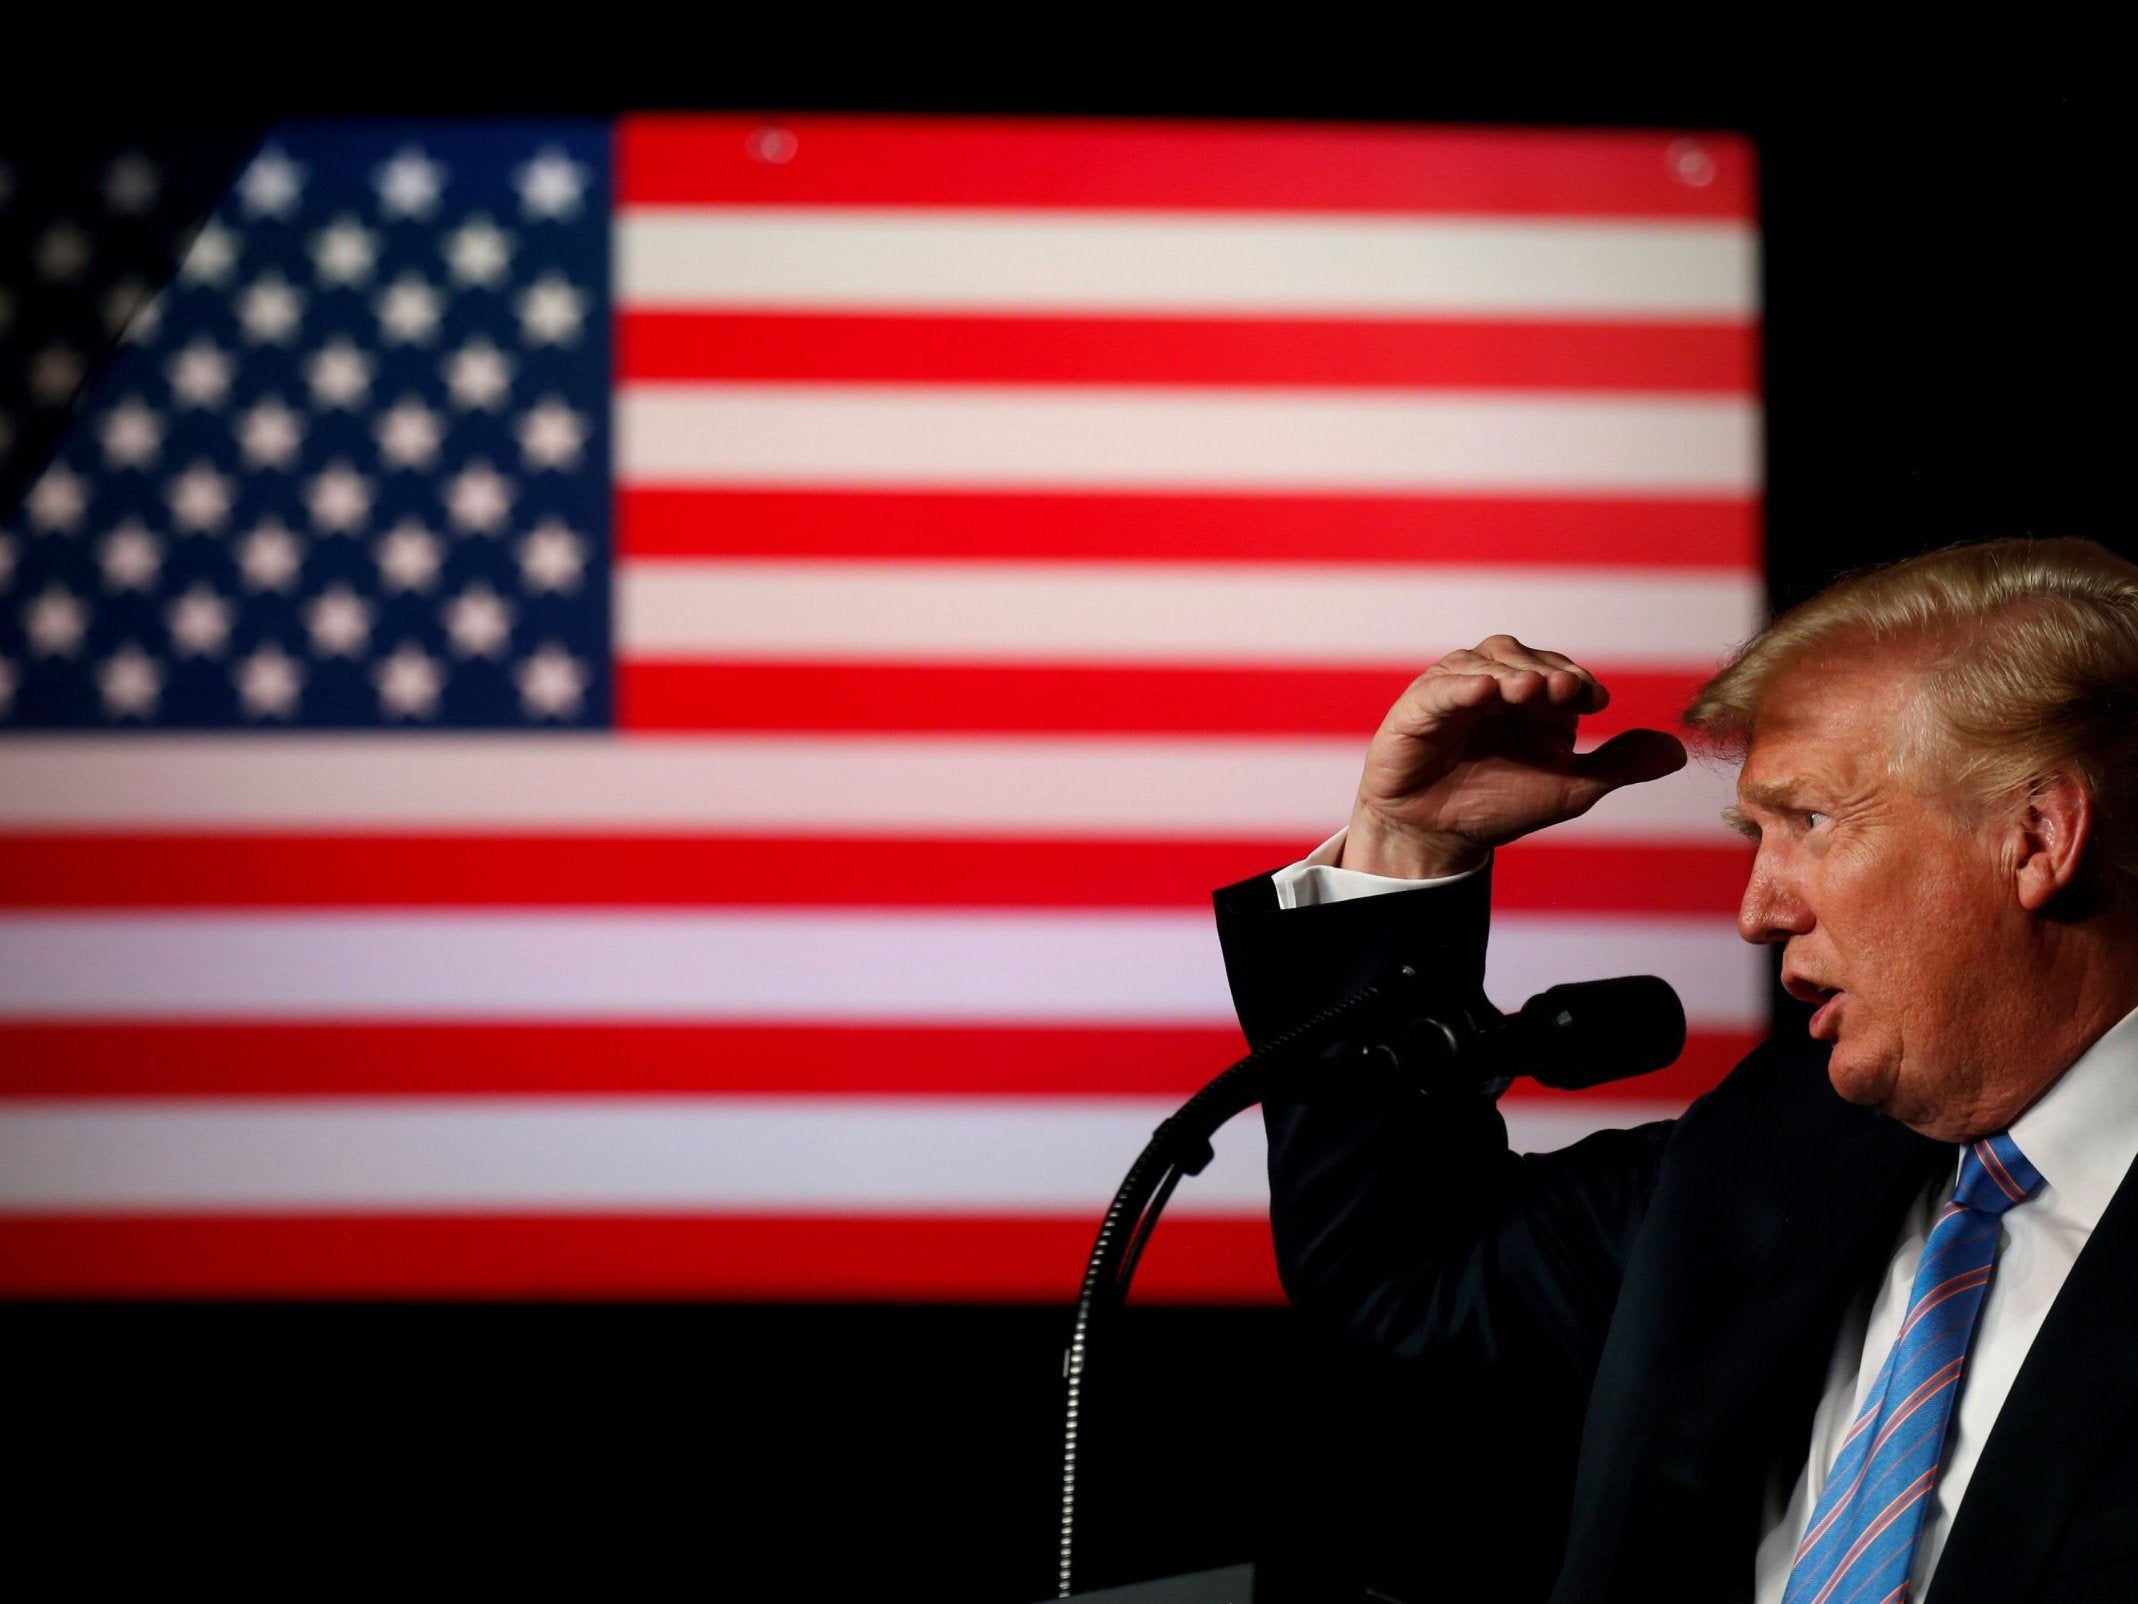 Donald Trump delivers remarks at a "Salute to Service" dinner held in honor of the nation's military at The Greenbrier in White Sulphur Springs, West Virginia